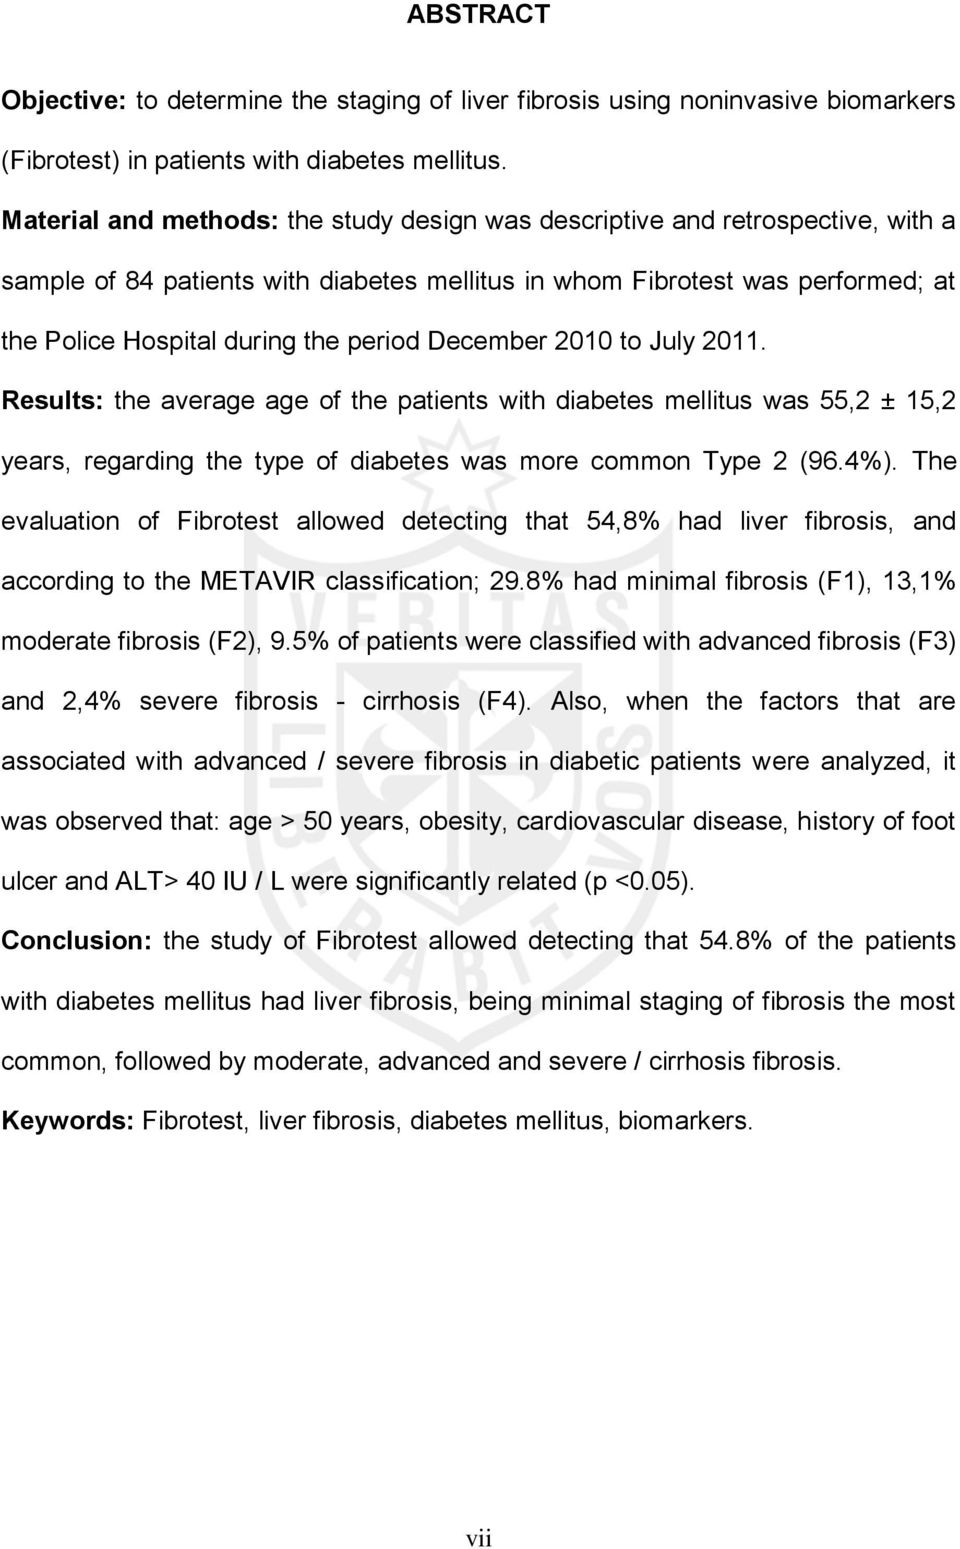 December 2010 to July 2011. Results: the average age of the patients with diabetes mellitus was 55,2 ± 15,2 years, regarding the type of diabetes was more common Type 2 (96.4%).